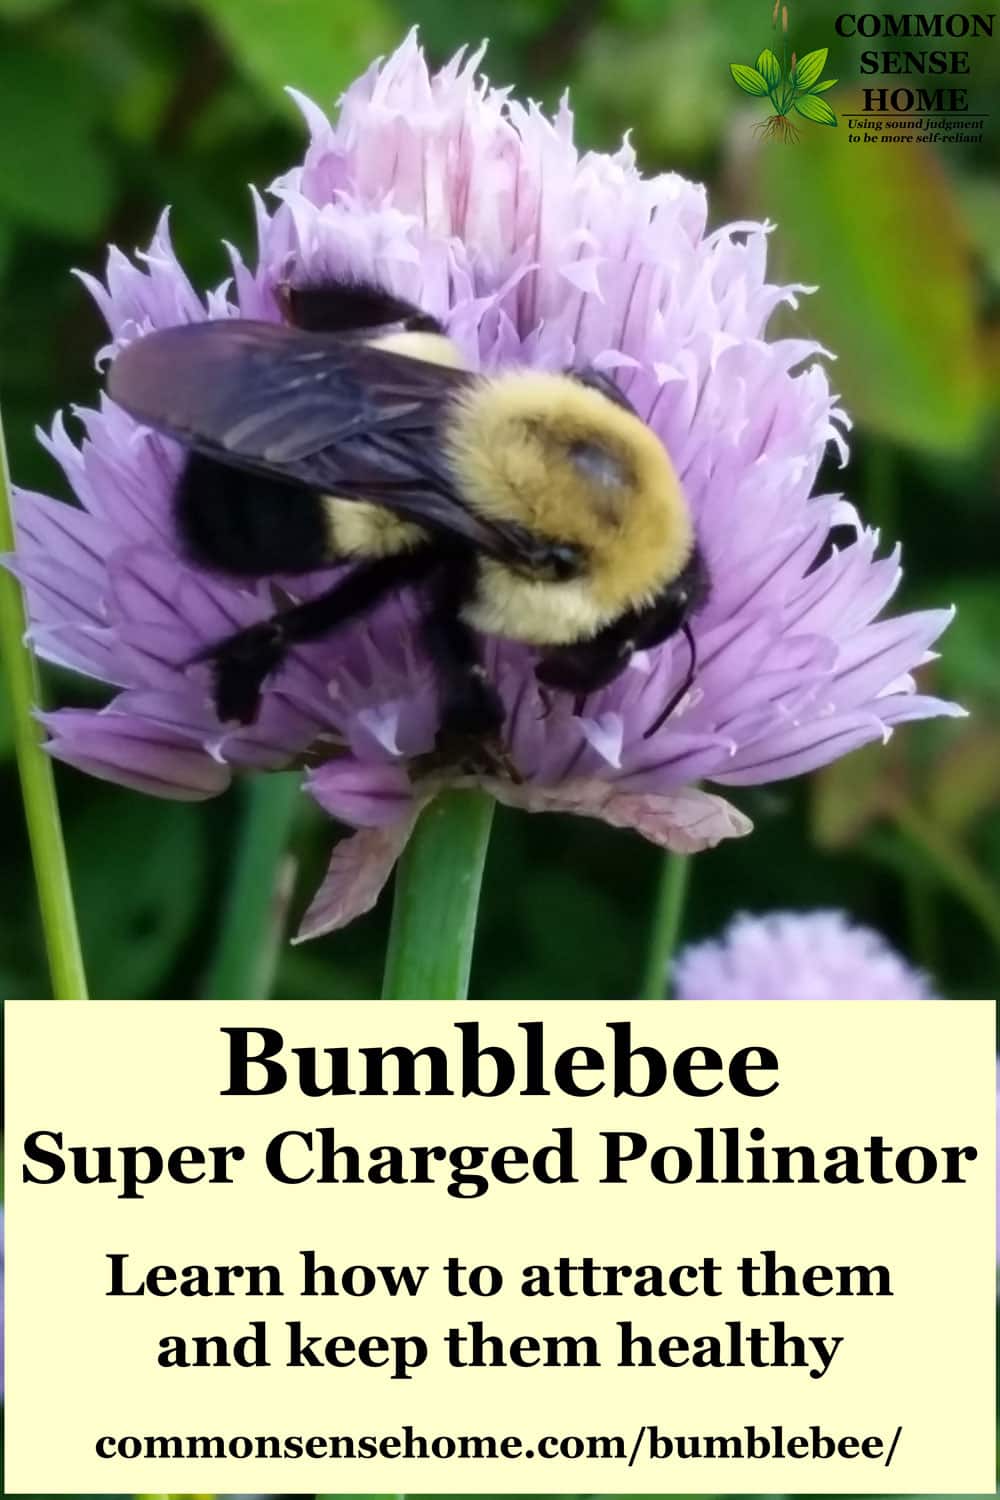 bumblebee on chive blossom with text overlay "Bumblebee - super charger pollinator"